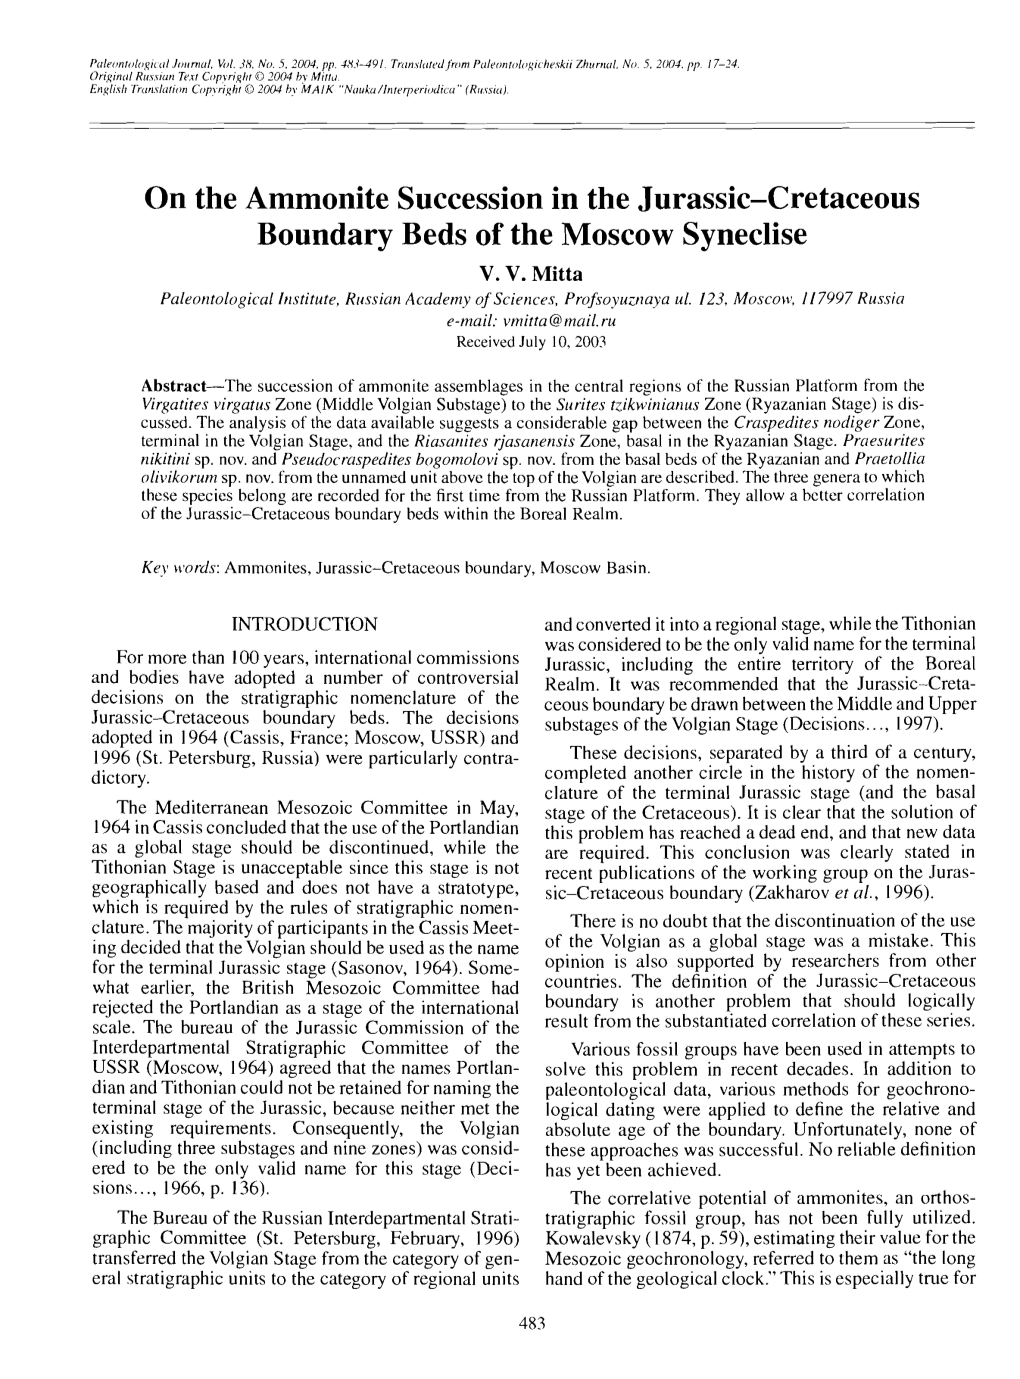 On the Ammoilite Succession in the Jurassic-Cretaceous Boundary Beds of the Moscow Syneclise V